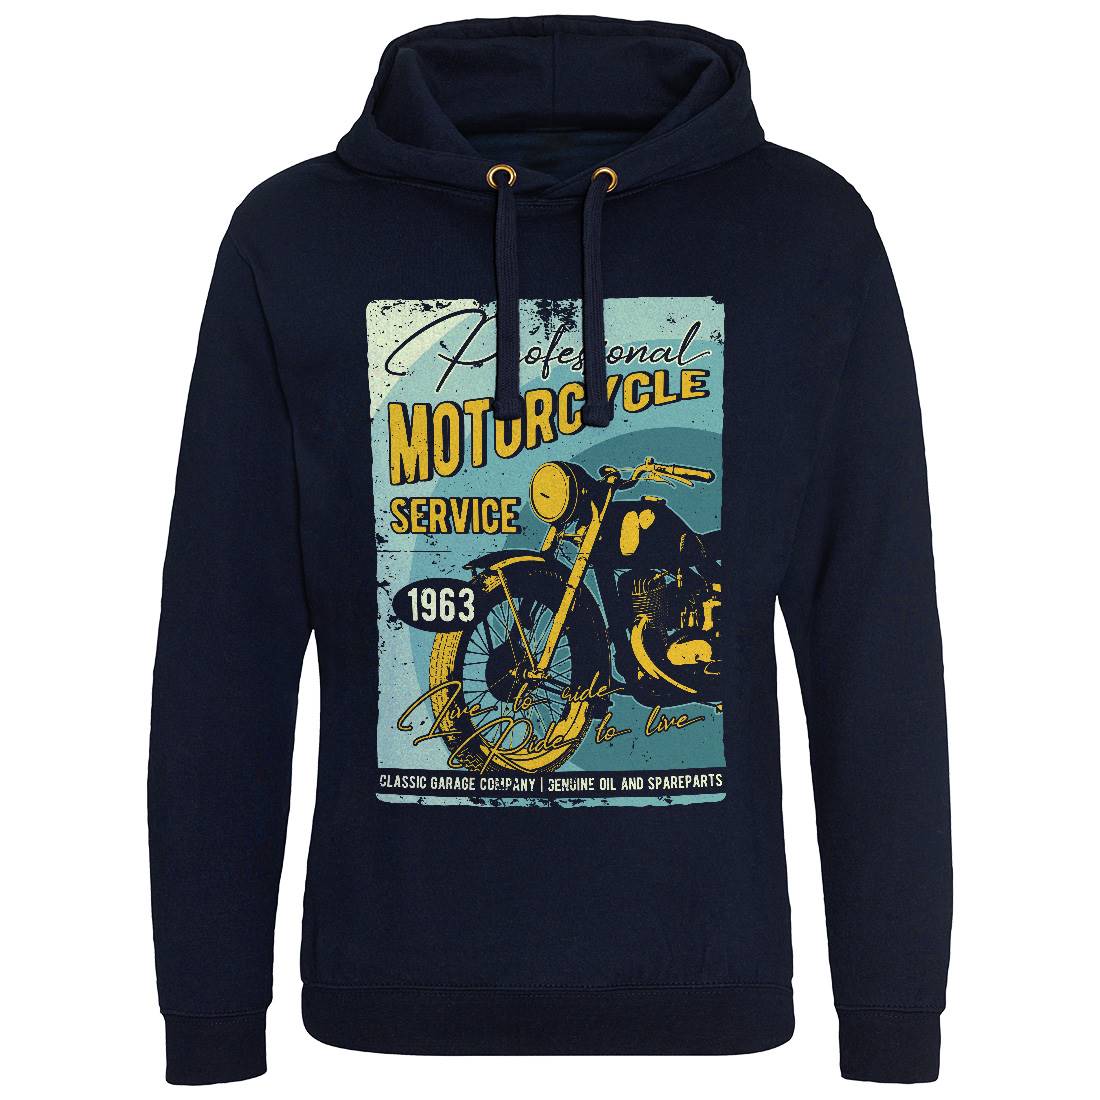 Motor Mens Hoodie Without Pocket Motorcycles B311